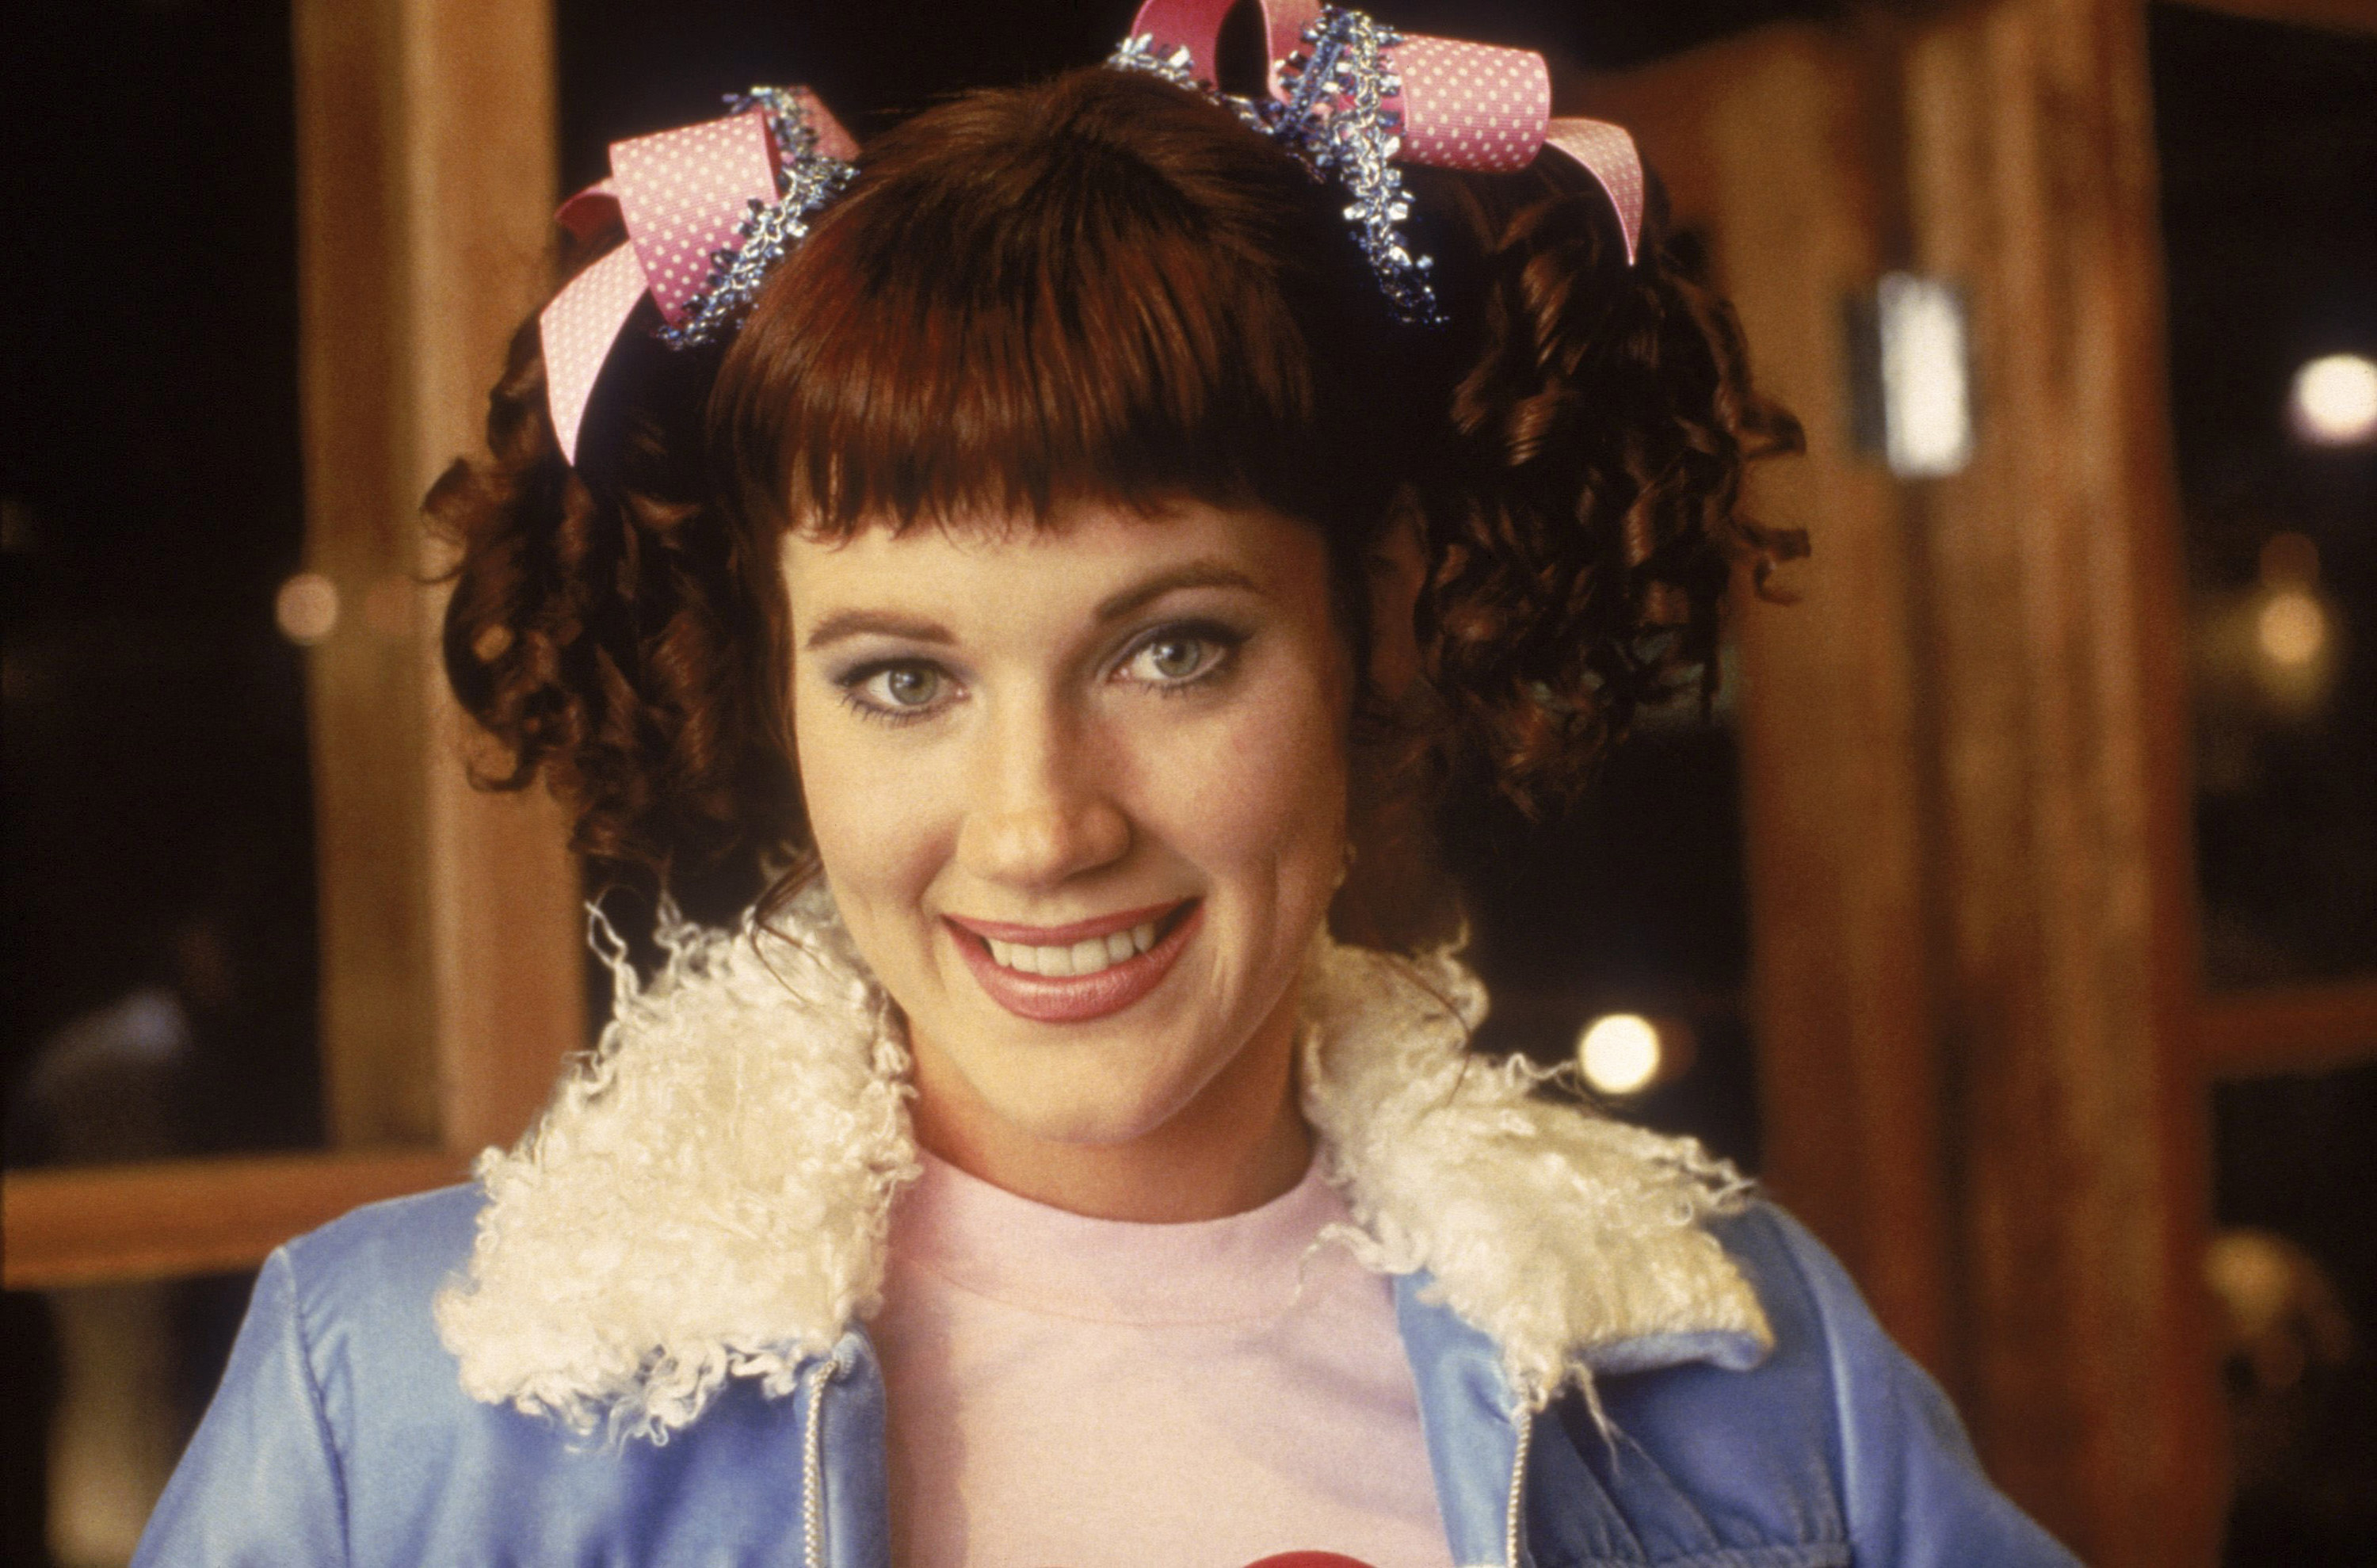 Donovan in a promo image for Clueless